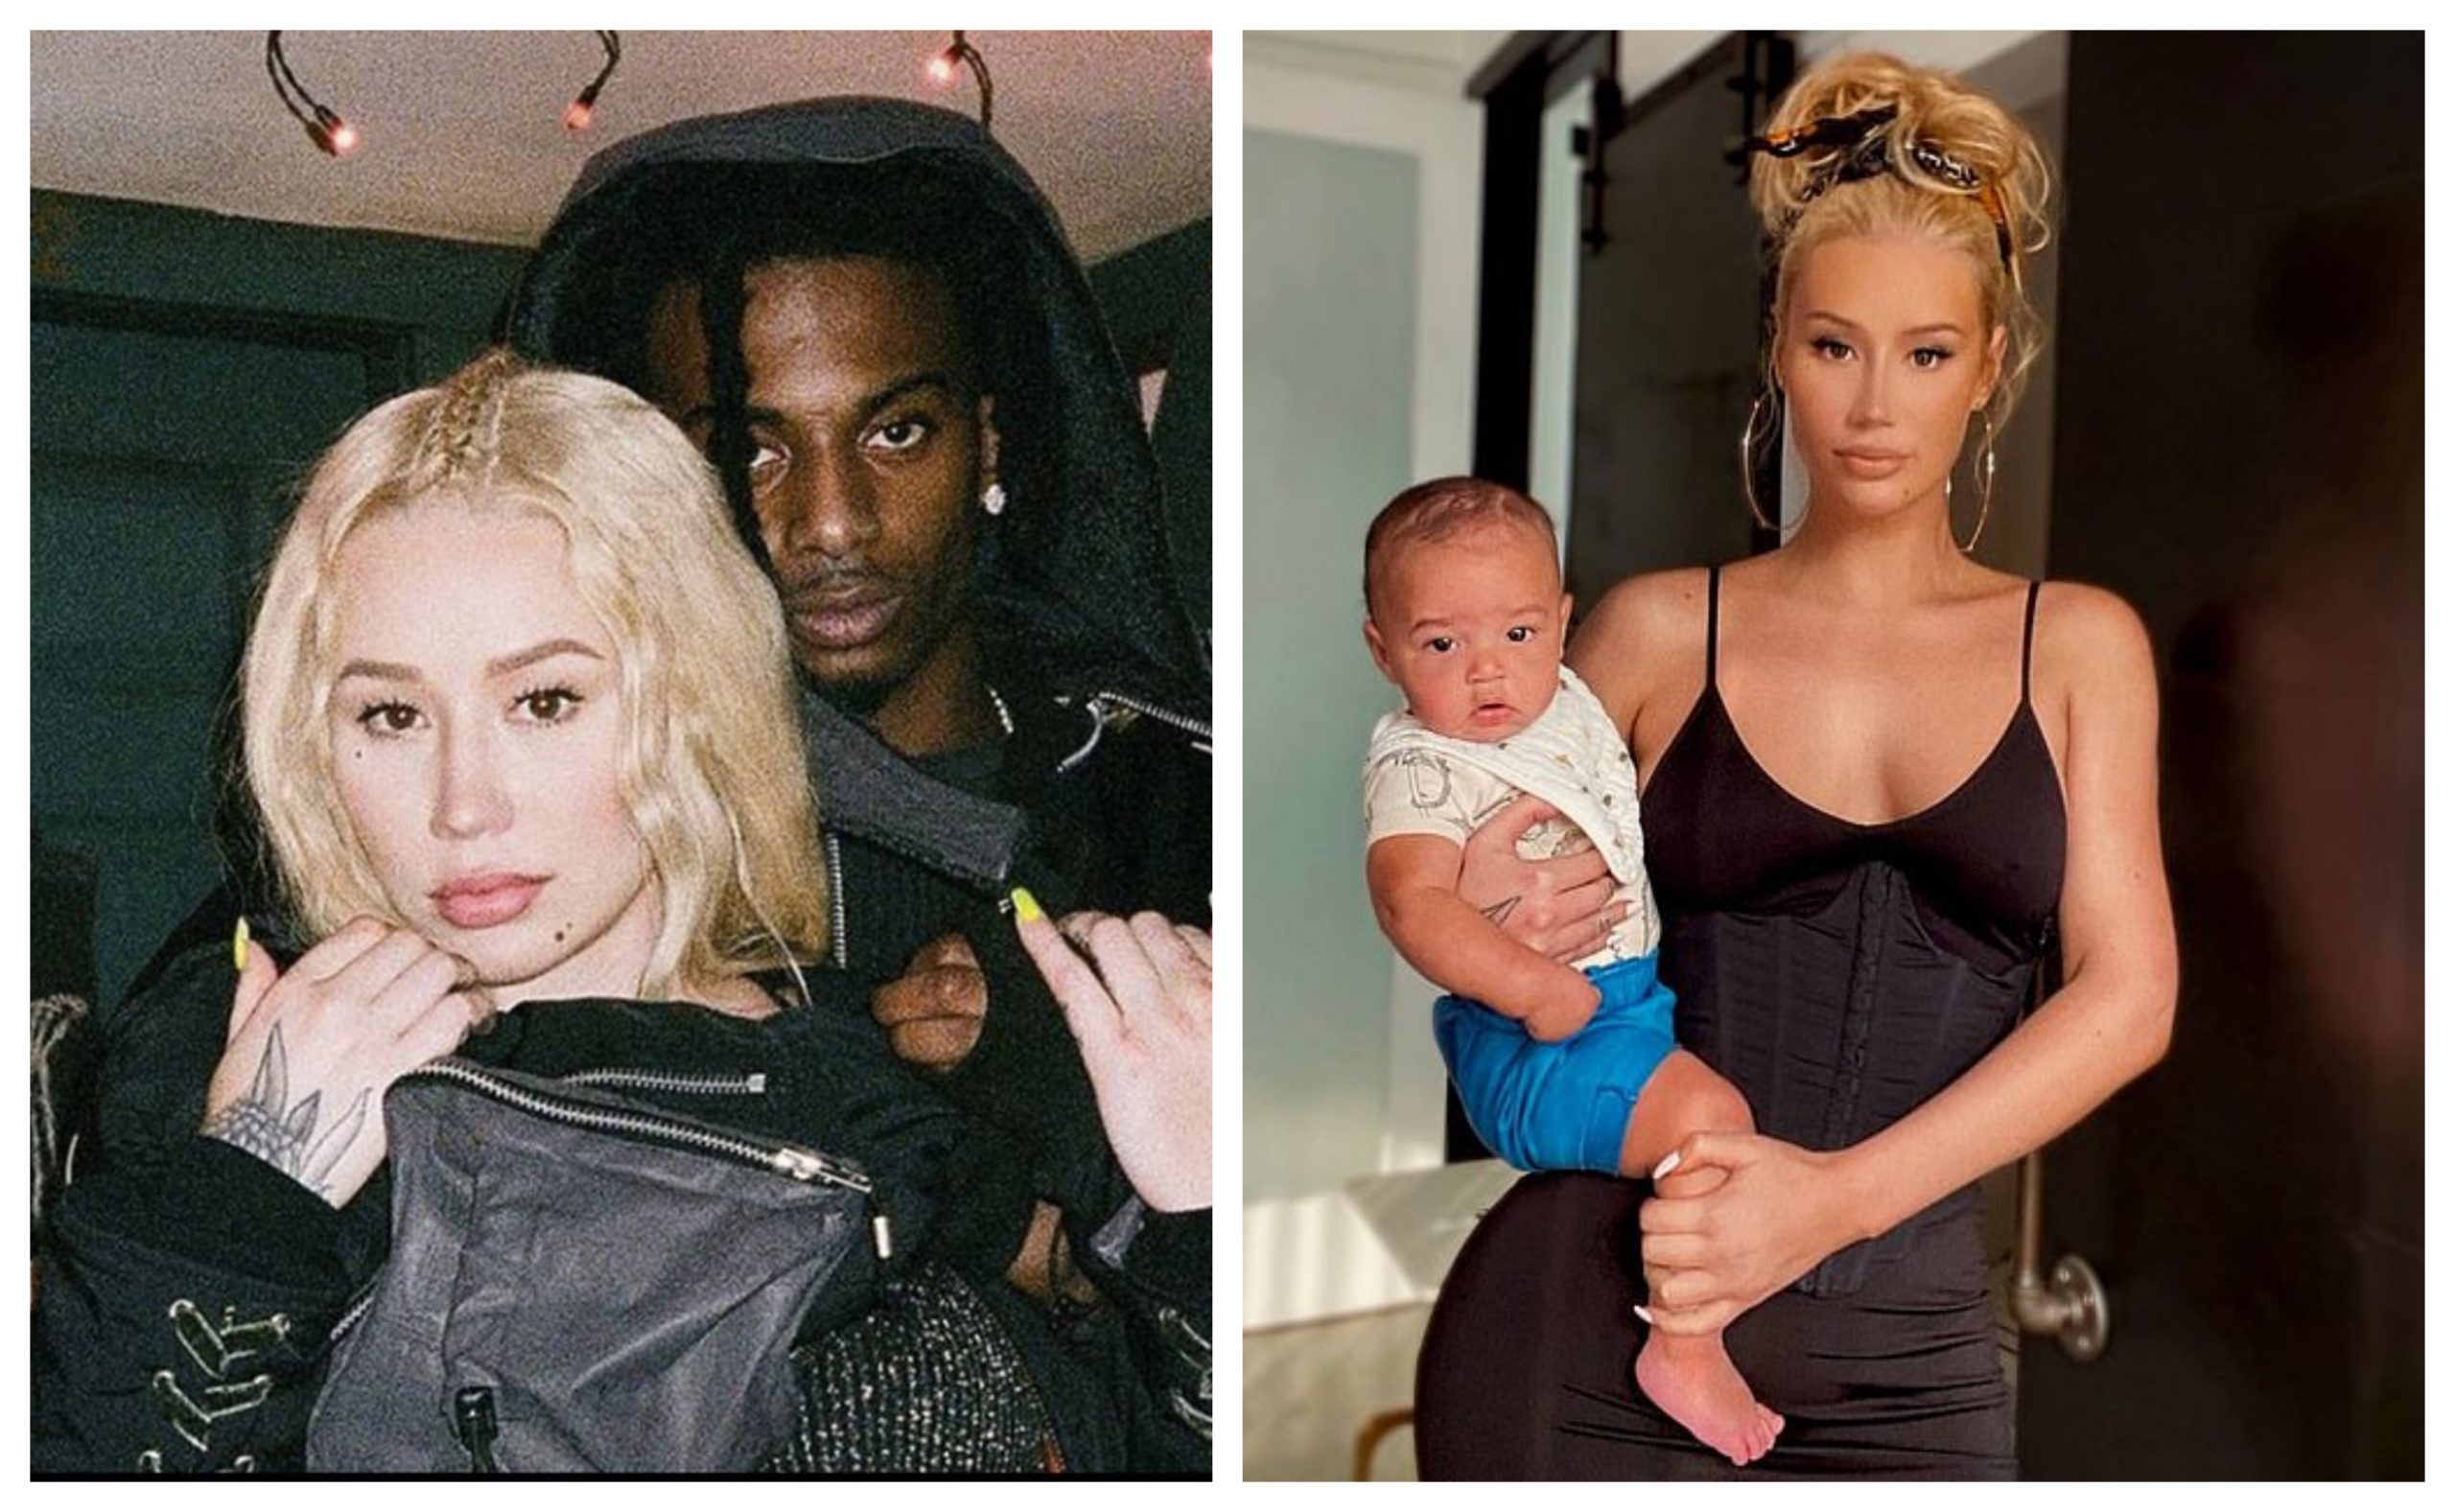 Iggy Azalea And Playboi Carti Appear To Settle Differences After New Video Of Him With Their Son That Grape Juice